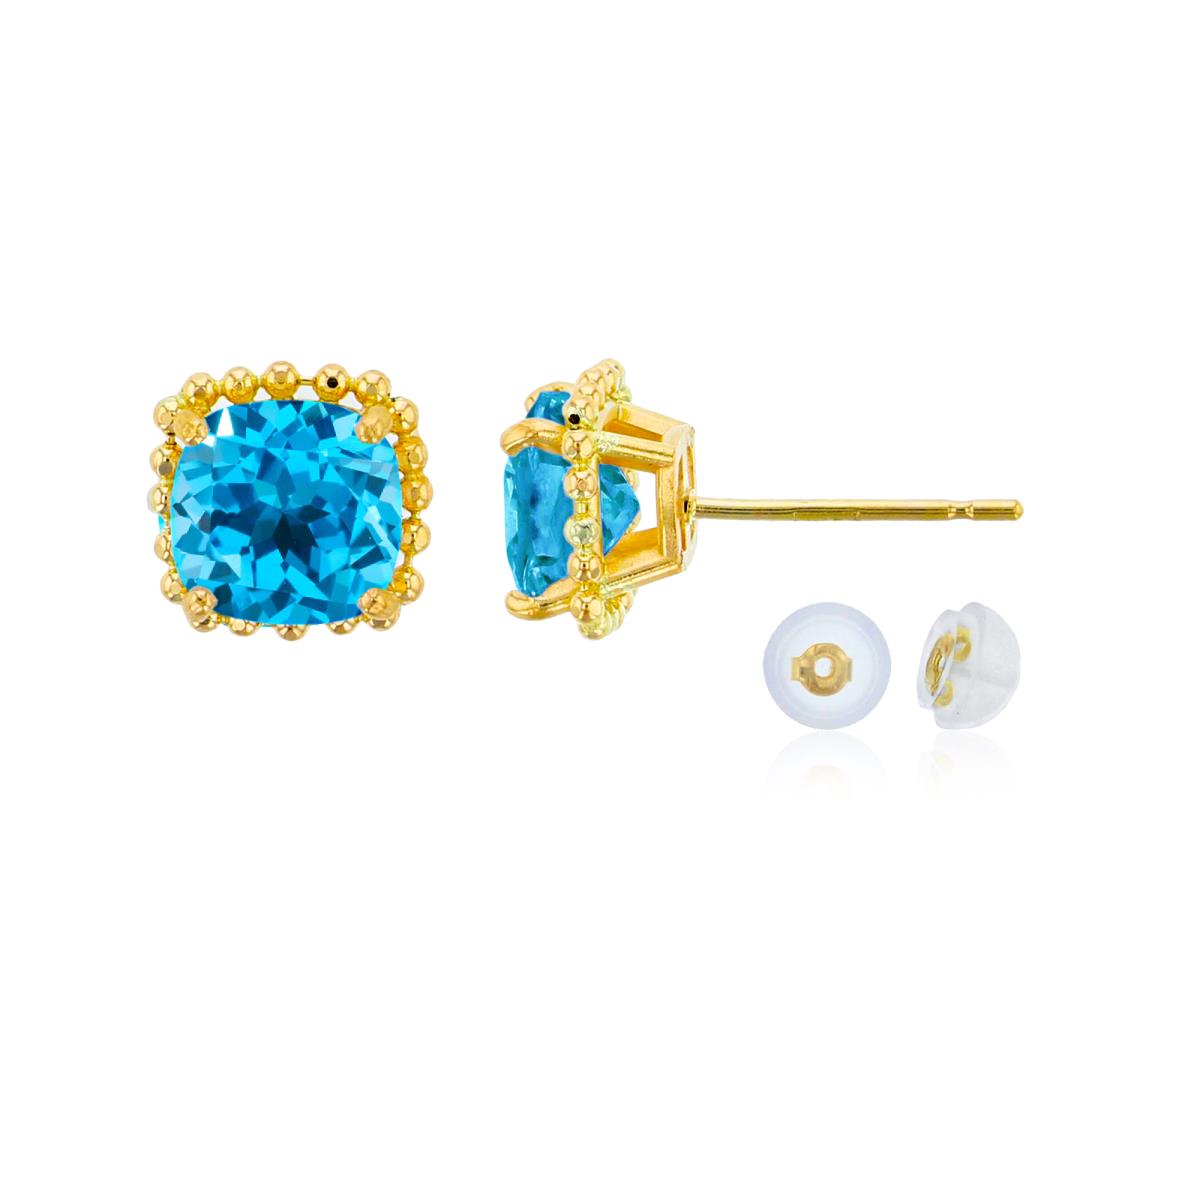 10K Yellow Gold 6x6mm Cushion Cut Swiss Blue Topaz Bead Frame Stud Earring with Silicone Back